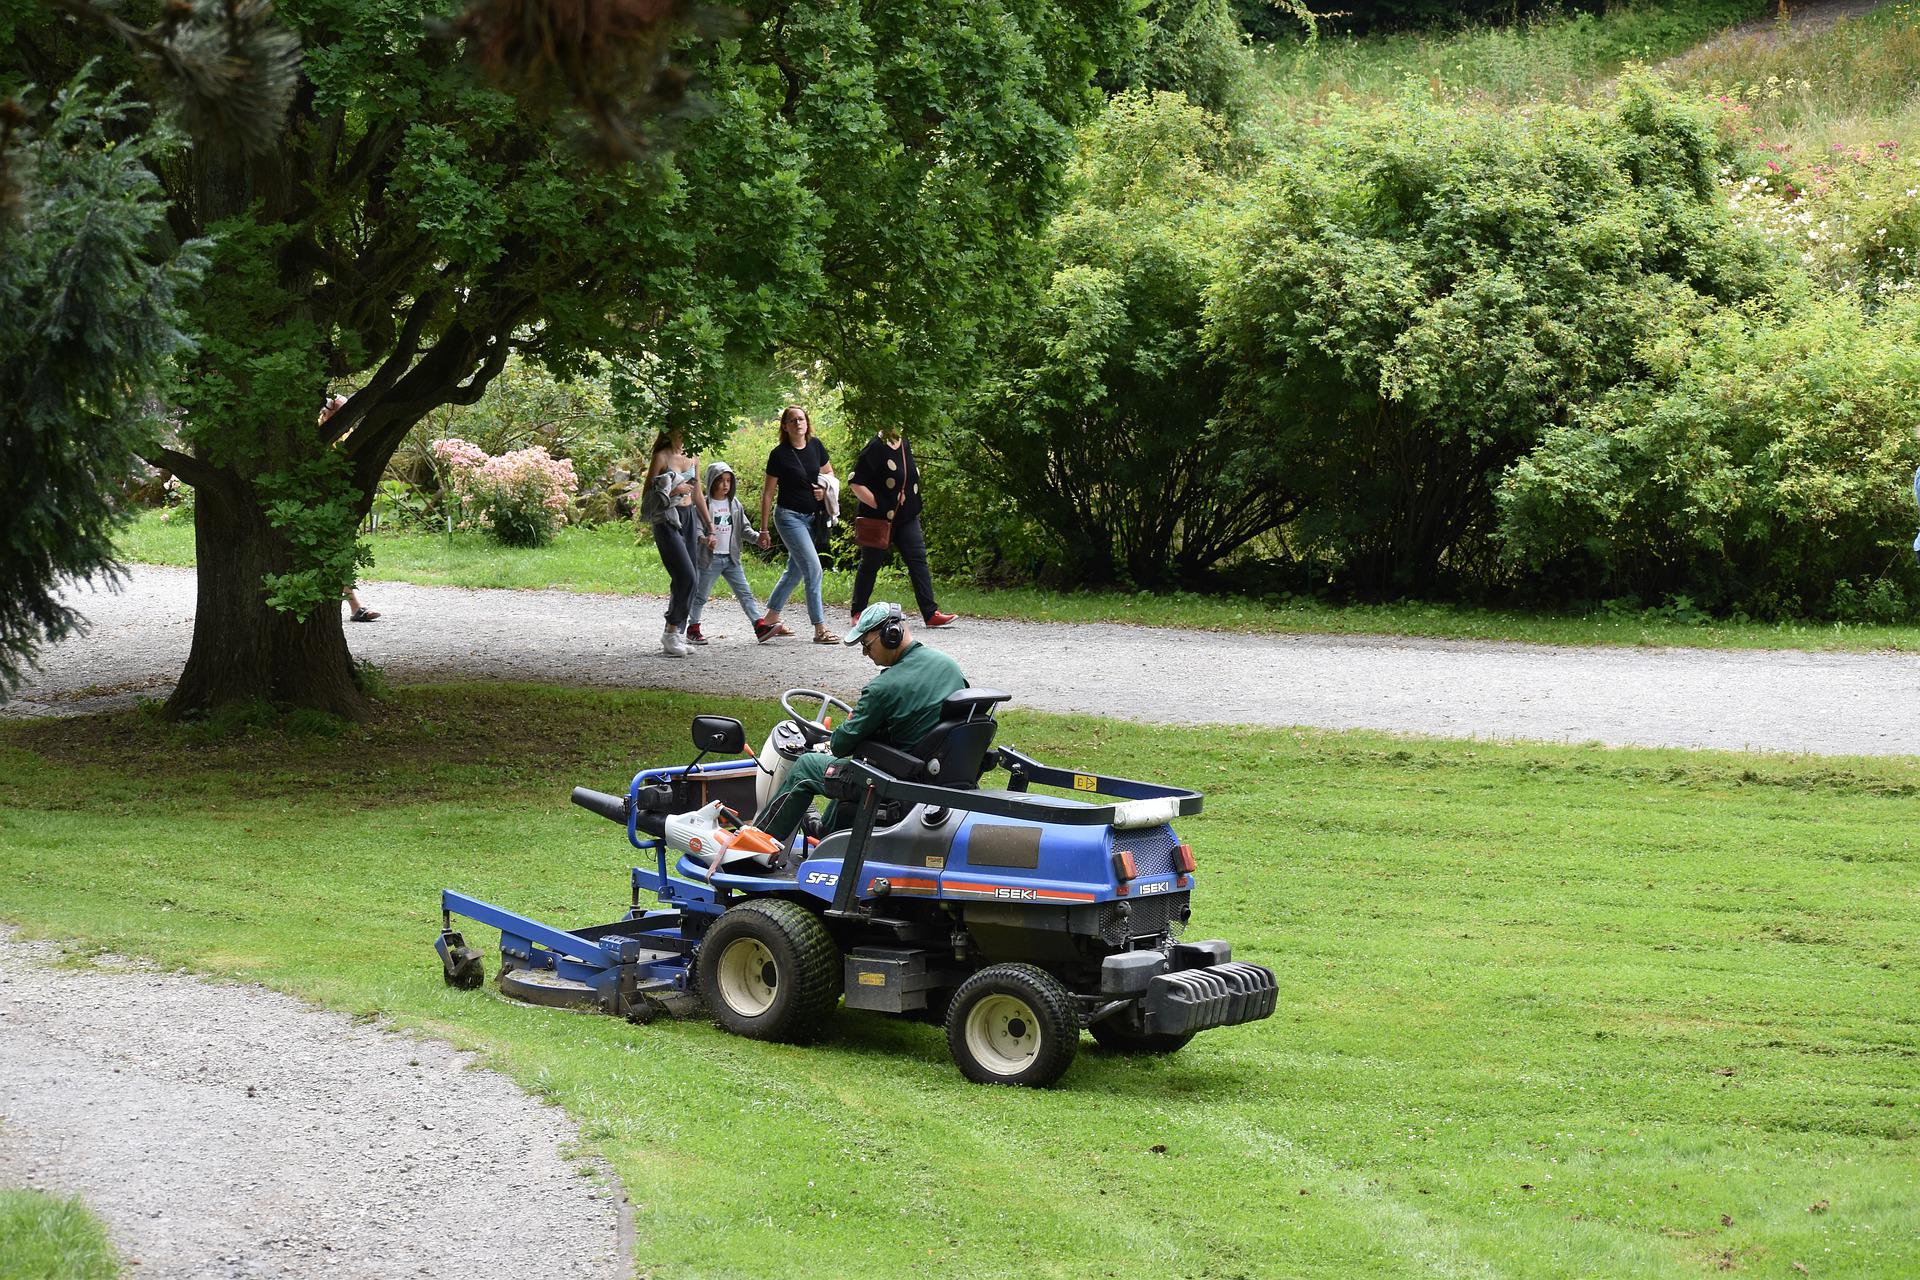 Considerations When Purchasing a Ride-On Lawn Mower